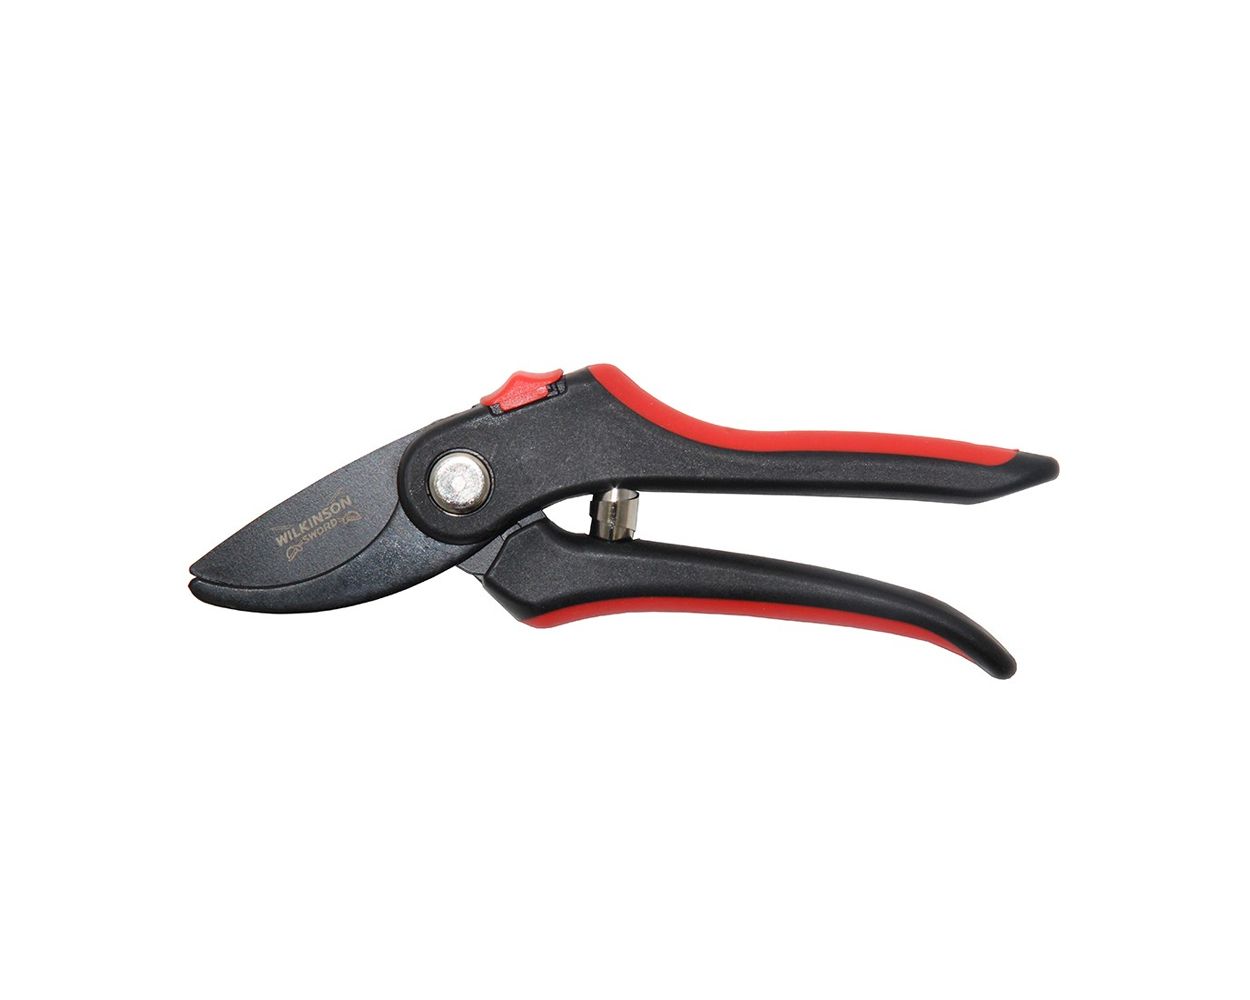 Wilkinson Sword RazorCut Pro Angled Head Bypass Pruner 22mm Cutting Capacity